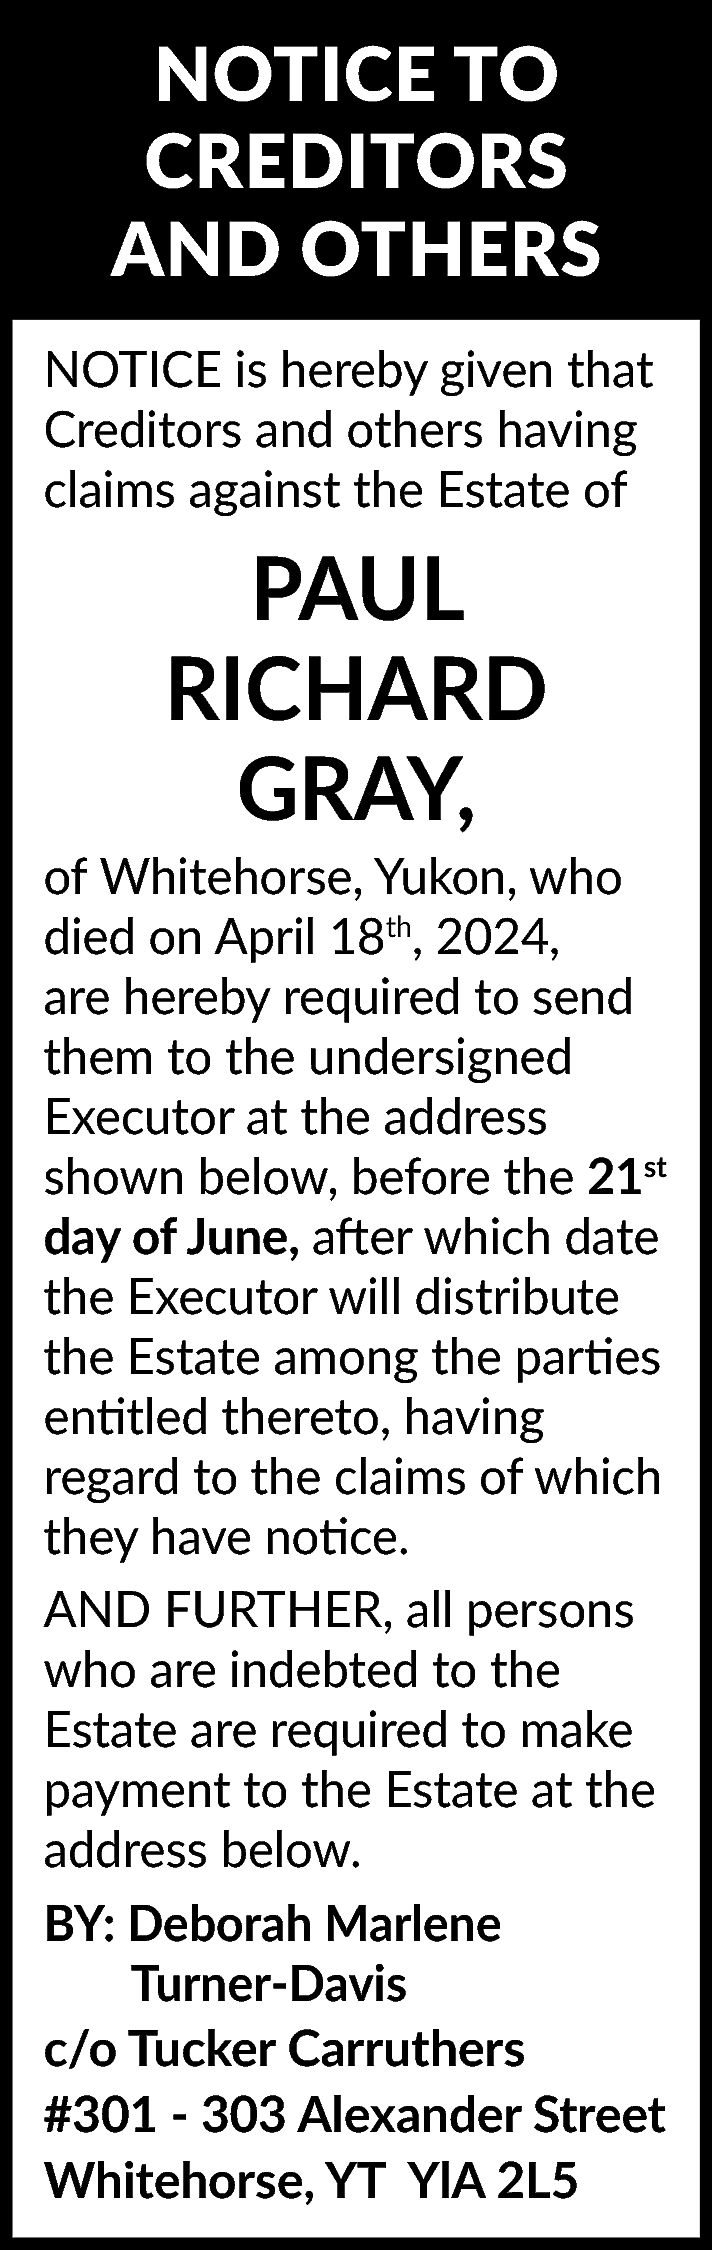 NOTICE TO <br>CREDITORS <br>AND OTHERS  NOTICE TO  CREDITORS  AND OTHERS  NOTICE is hereby given that  Creditors and others having  claims against the Estate of    PAUL  RICHARD  GRAY,    of Whitehorse, Yukon, who  died on April 18th, 2024,  are hereby required to send  them to the undersigned  Executor at the address  shown below, before the 21st  day of June, after which date  the Executor will distribute  the Estate among the parties  entitled thereto, having  regard to the claims of which  they have notice.  AND FURTHER, all persons  who are indebted to the  Estate are required to make  payment to the Estate at the  address below.  BY: Deborah Marlene  Turner-Davis  c/o Tucker Carruthers  #301 - 303 Alexander Street  Whitehorse, YT YlA 2L5    